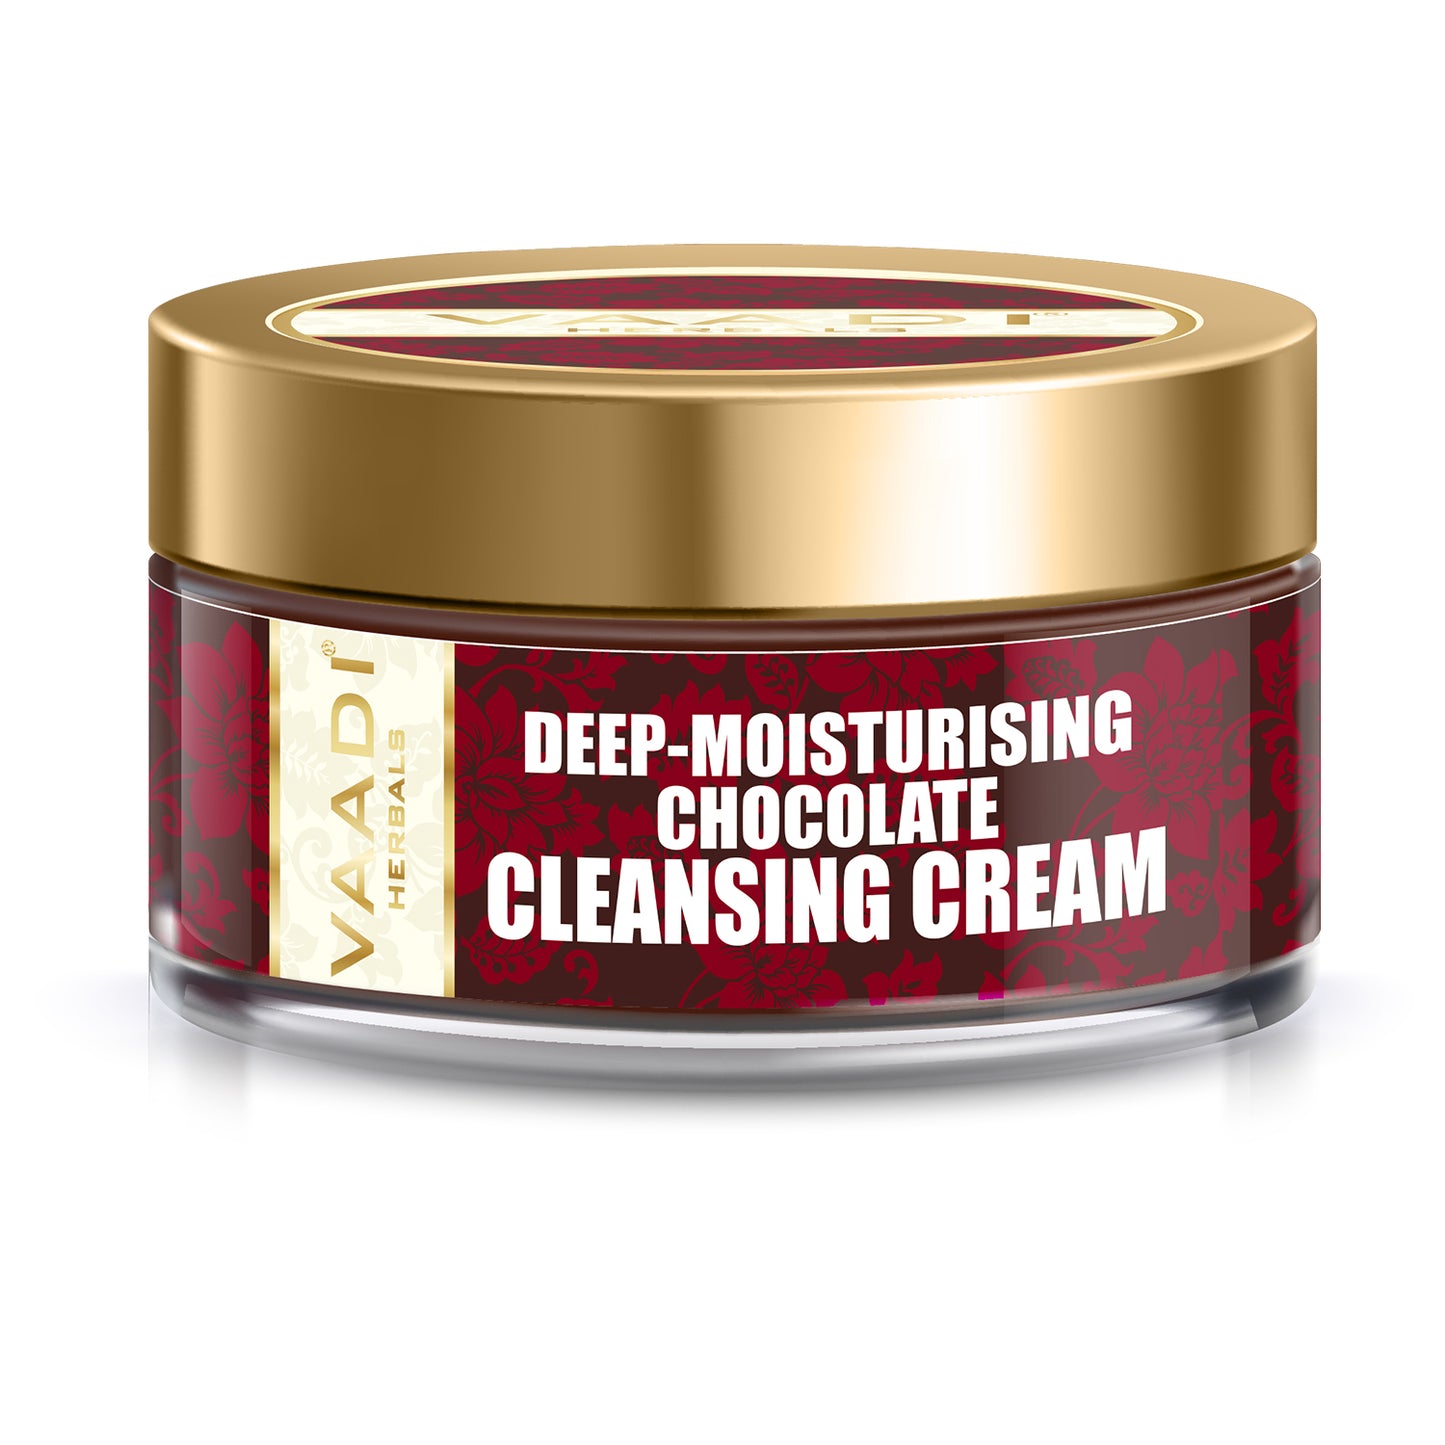 Deep Moisturising Organic Chocolate Cleansing Cream with Strawberry Extract - Softens Skin - Makes Skin Radiant (50 gms / 2 oz)